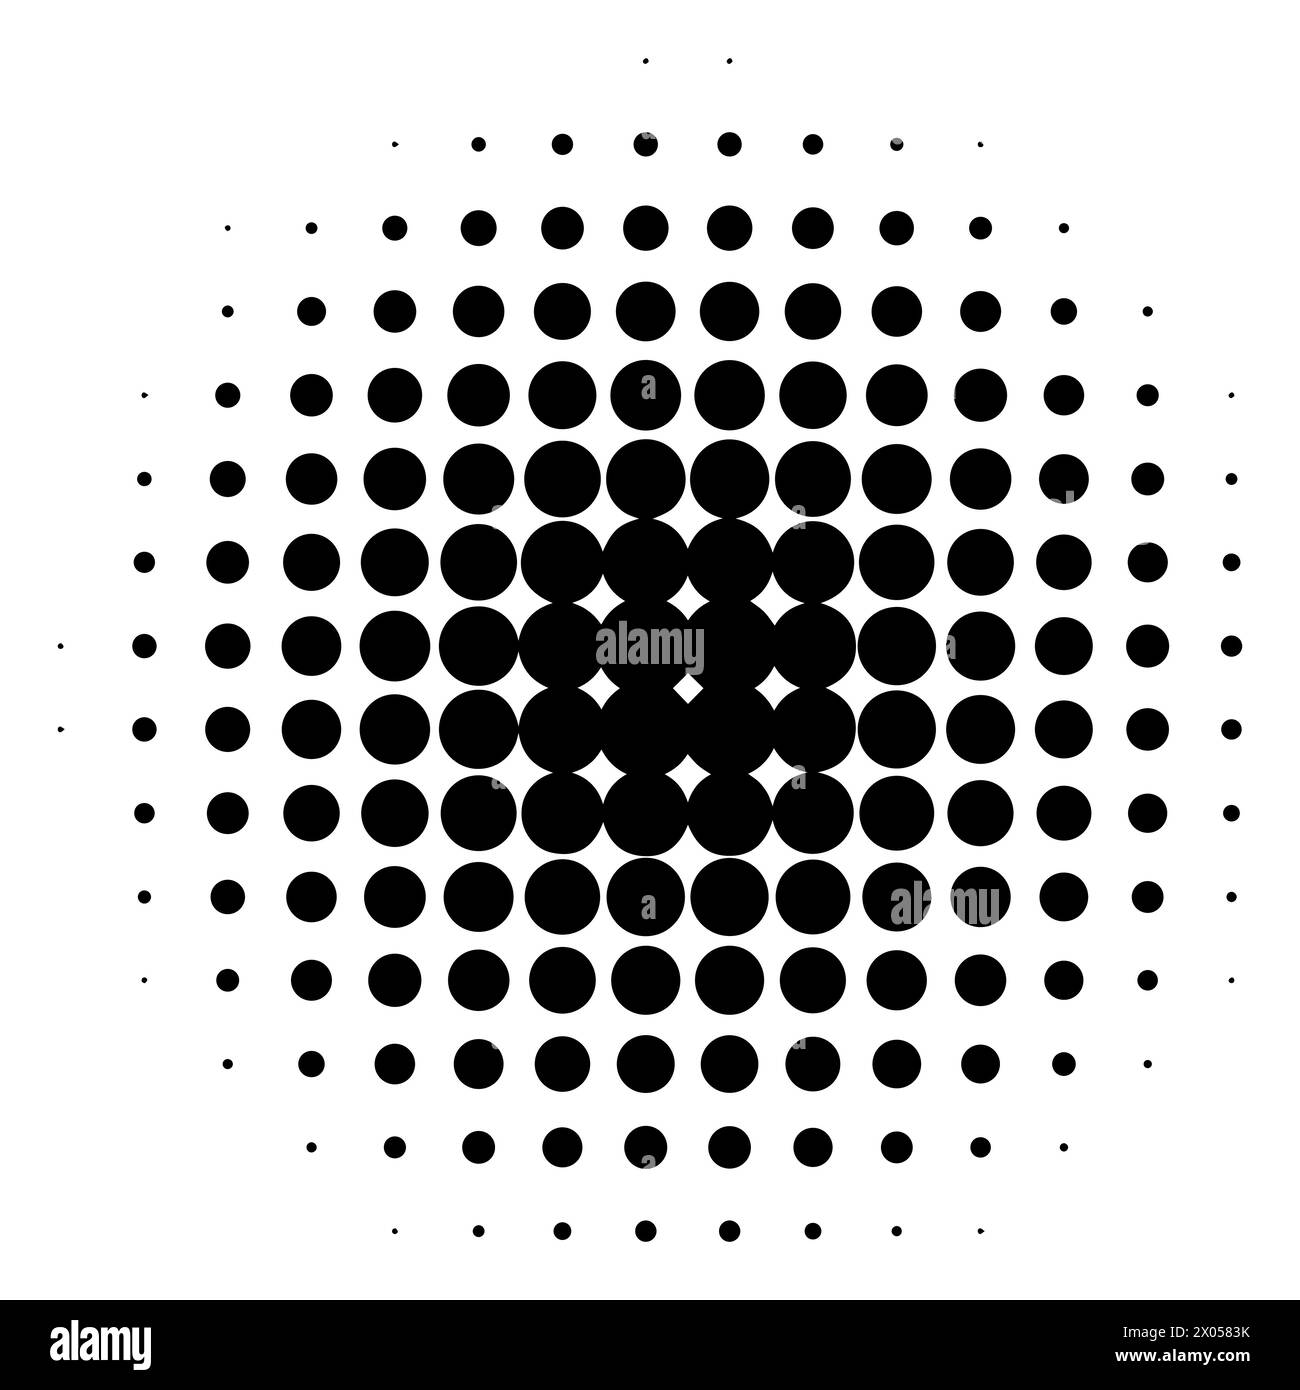 Optical illusion dot grid. Concentric circles creating a visual effect. Black on white abstract pattern. Vector illustration. EPS 10. Stock Vector